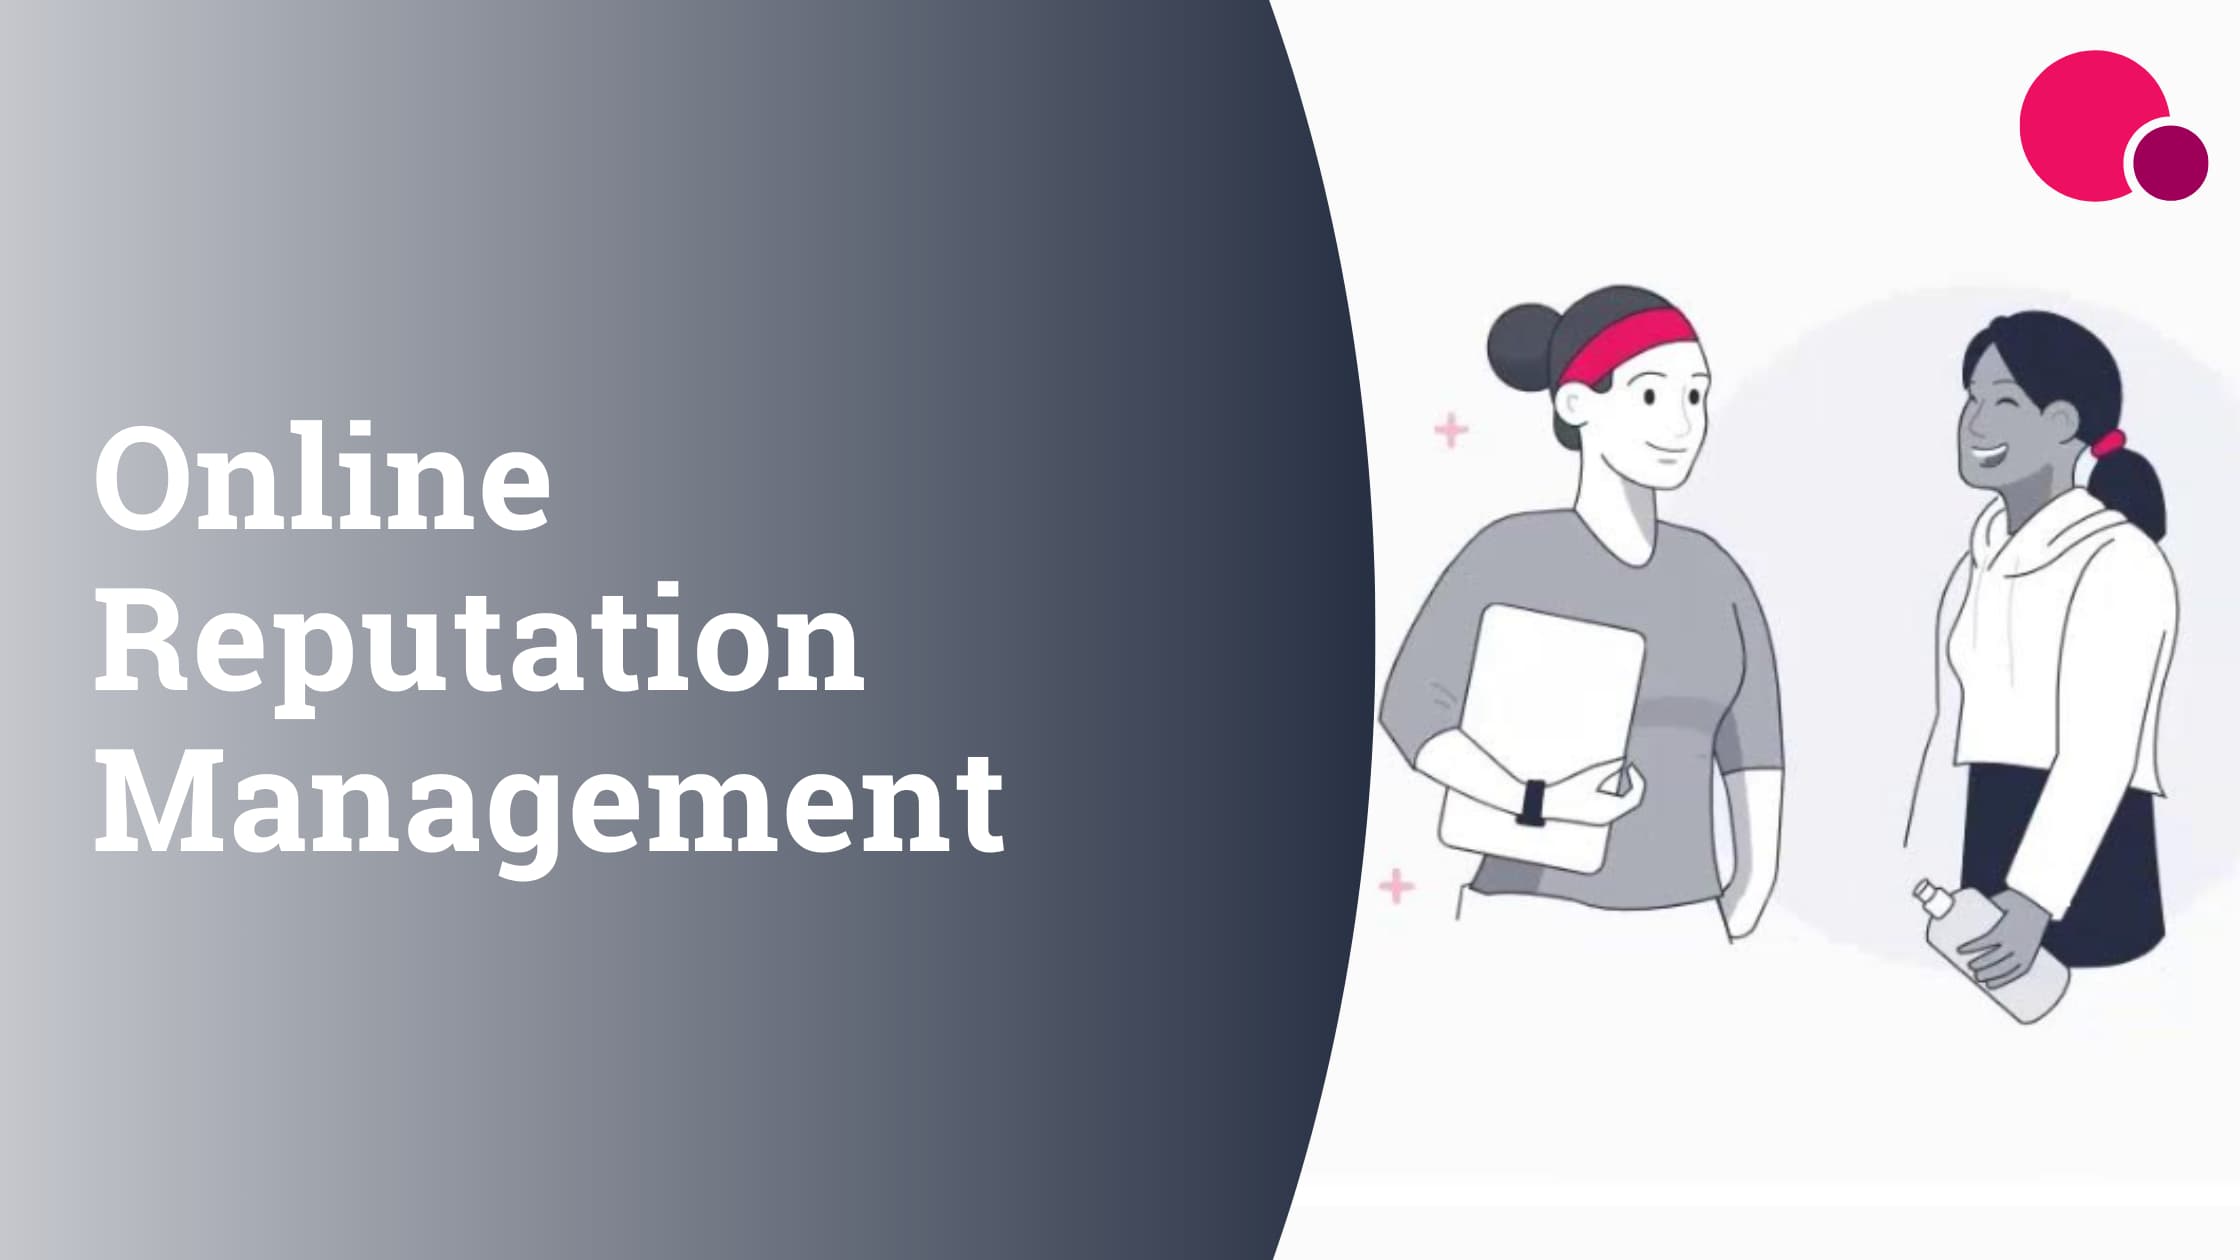 Online reputation management: What it is, importance & strategy